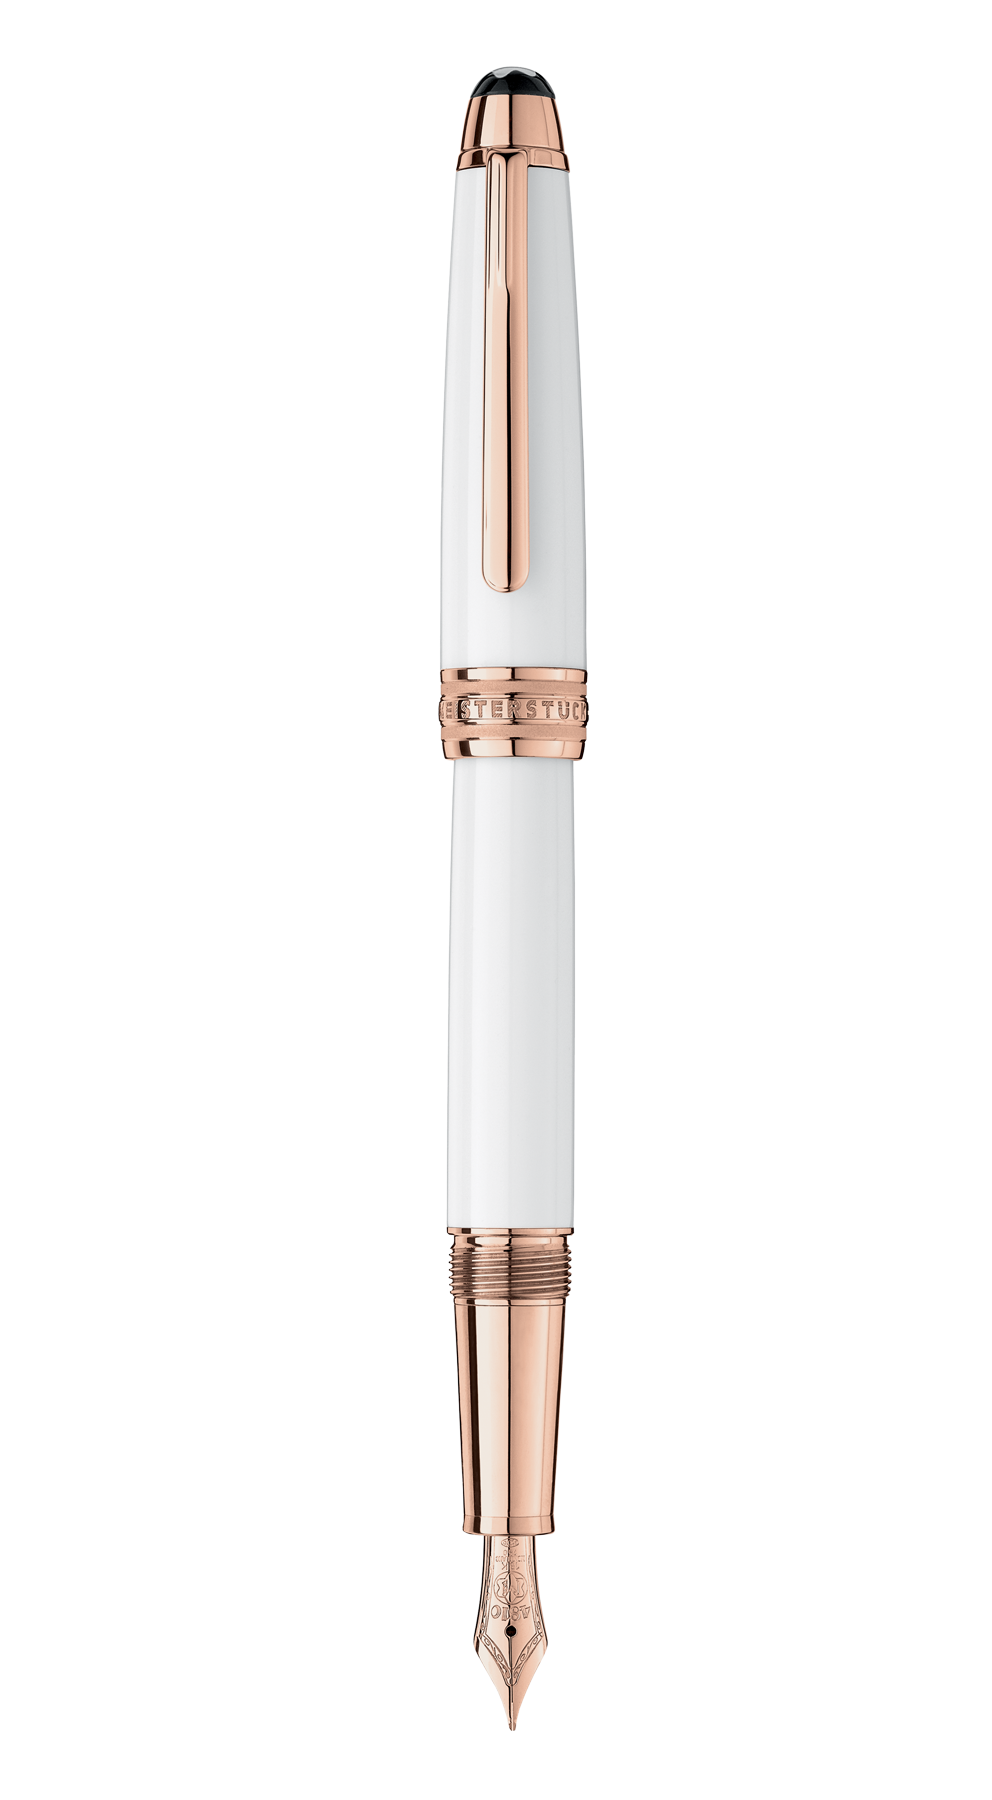 Bút máy Montblanc Meiterstuck White Solitaire Classic red gold